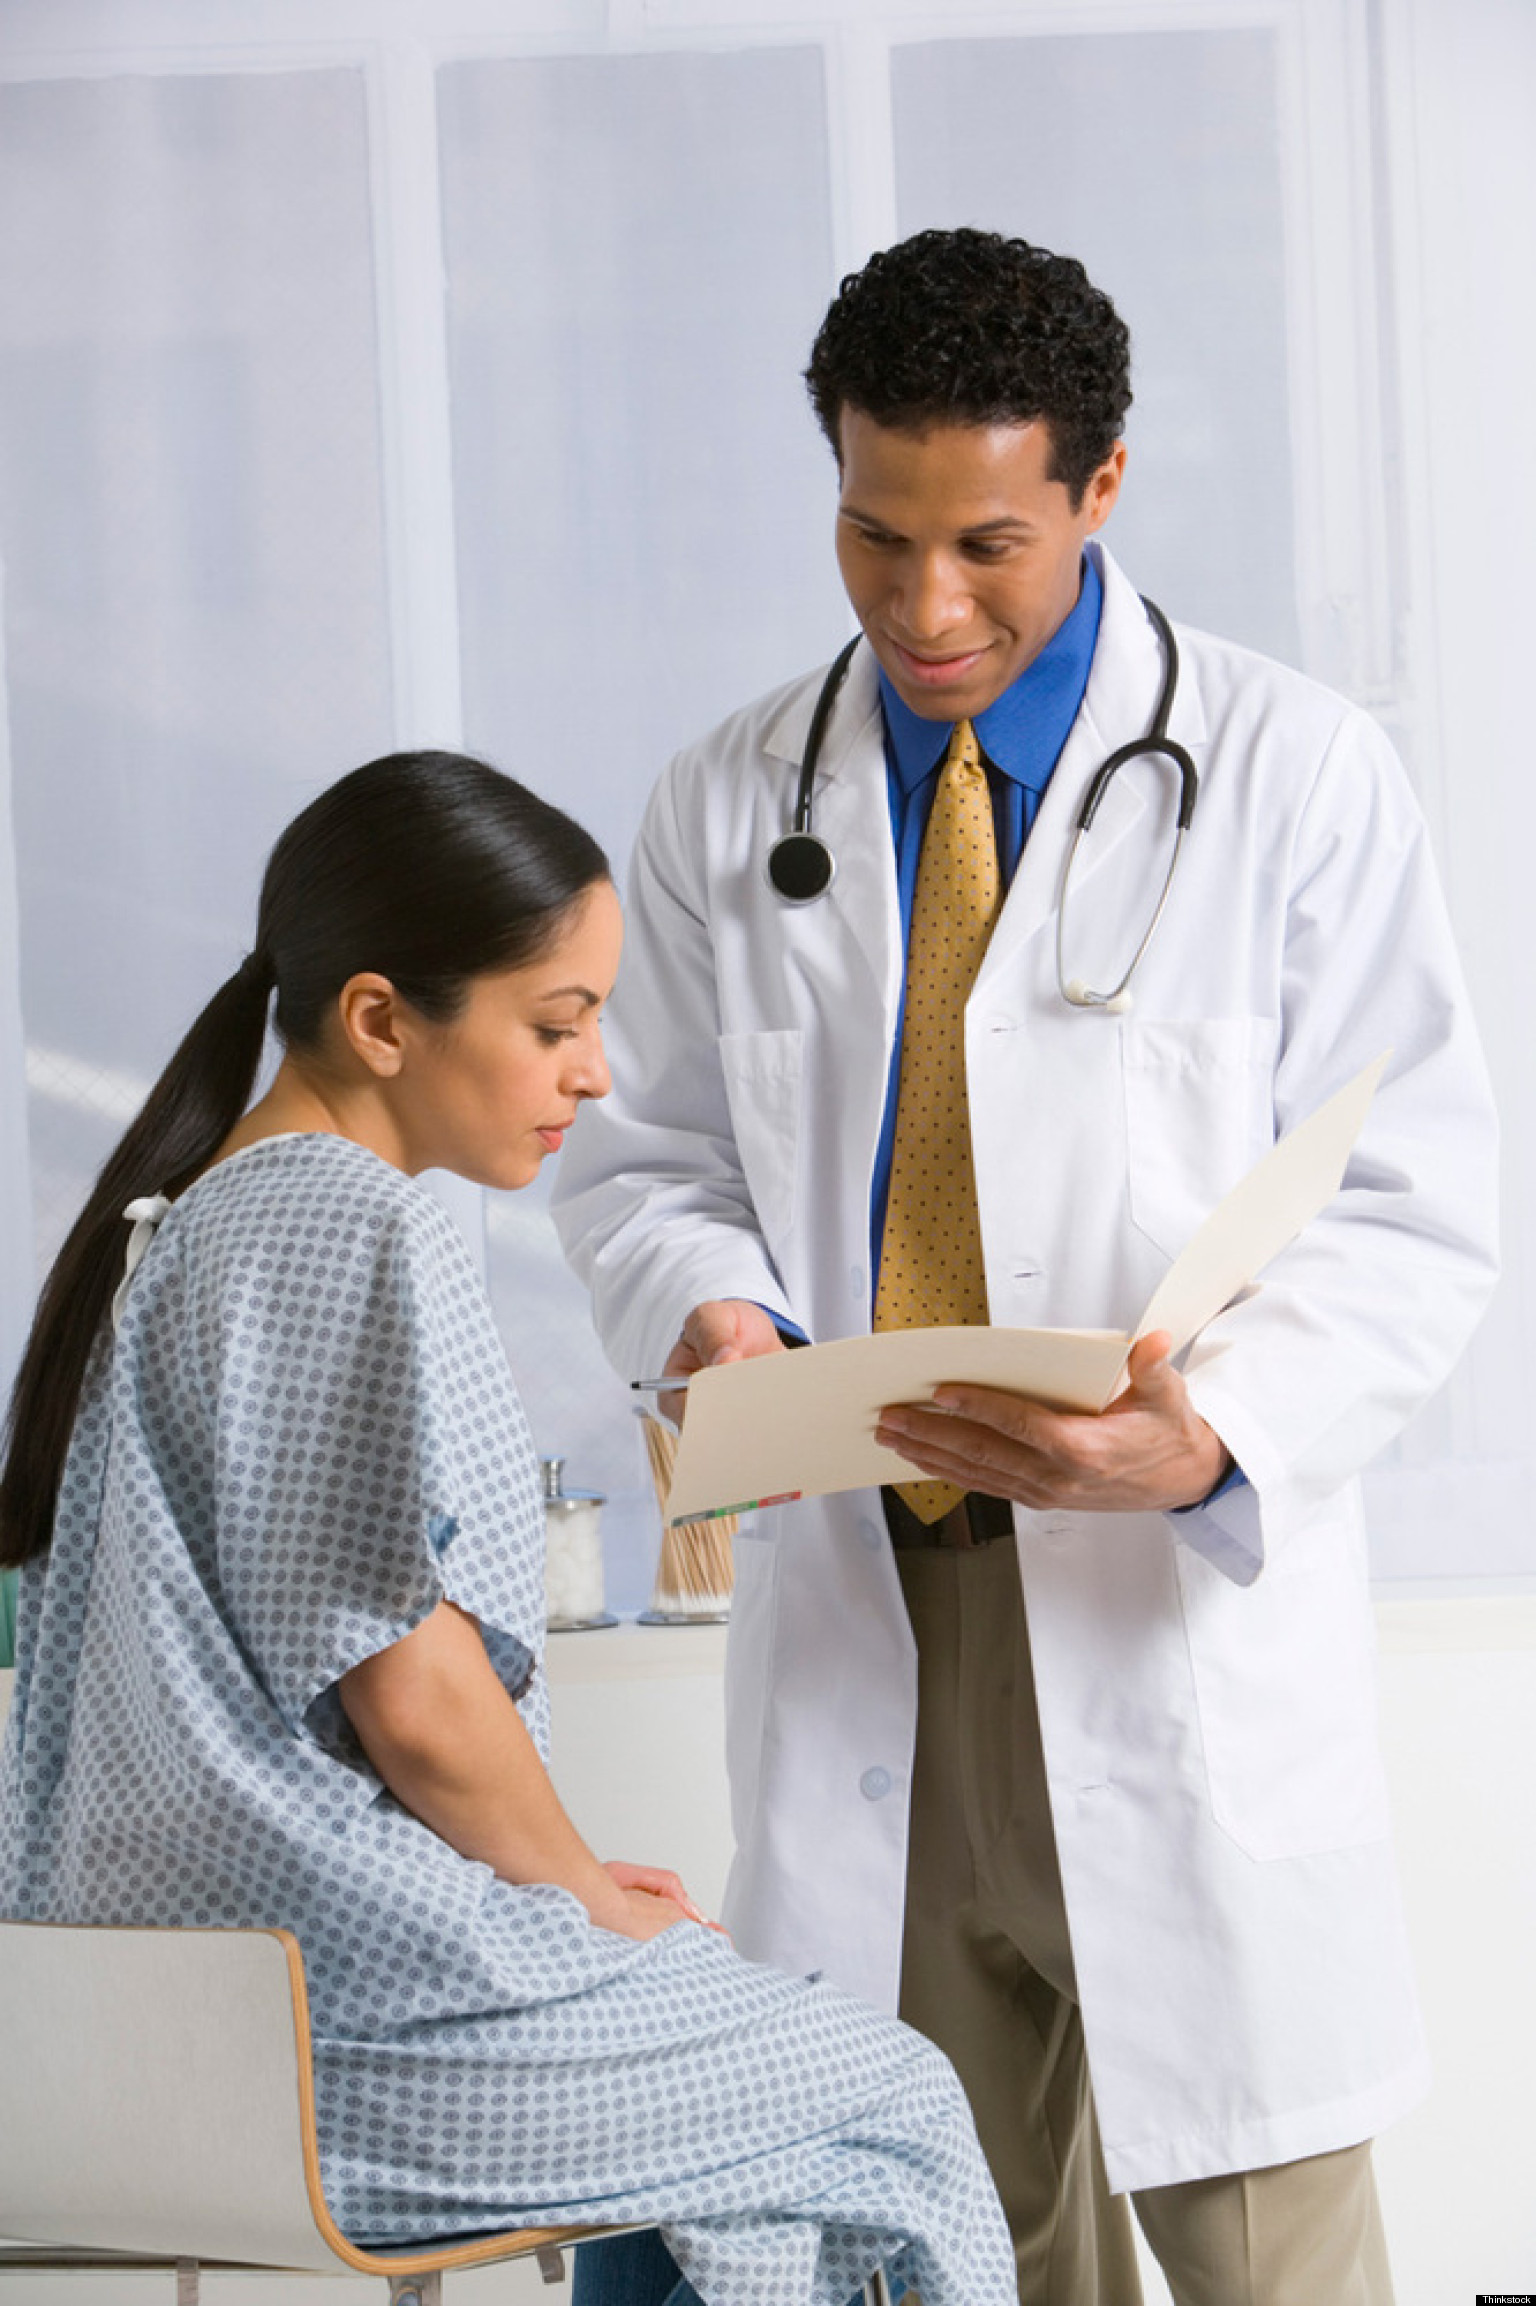 Need a Doctor's Appointment? Here's What to Do | HuffPost